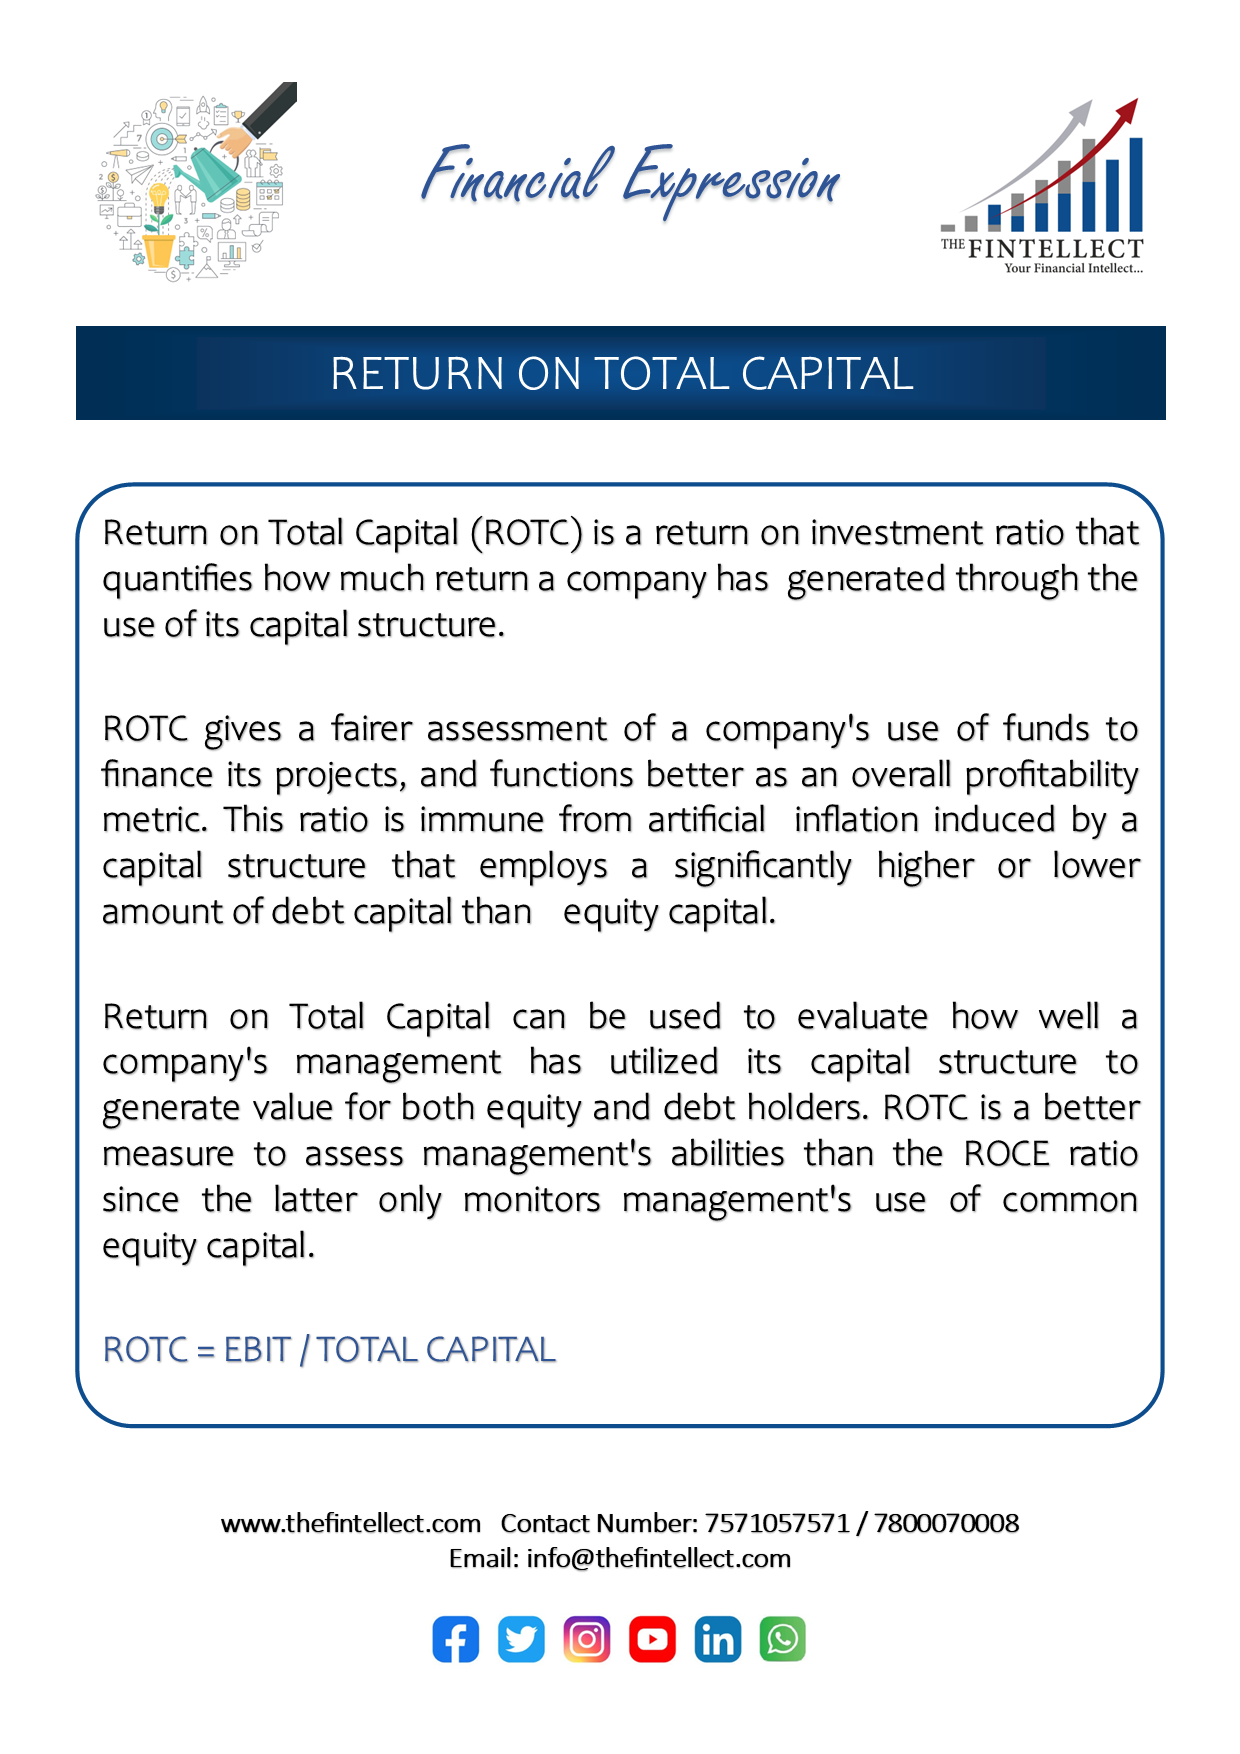 9636877_RETURN ON TOTAL CAPITAL.png